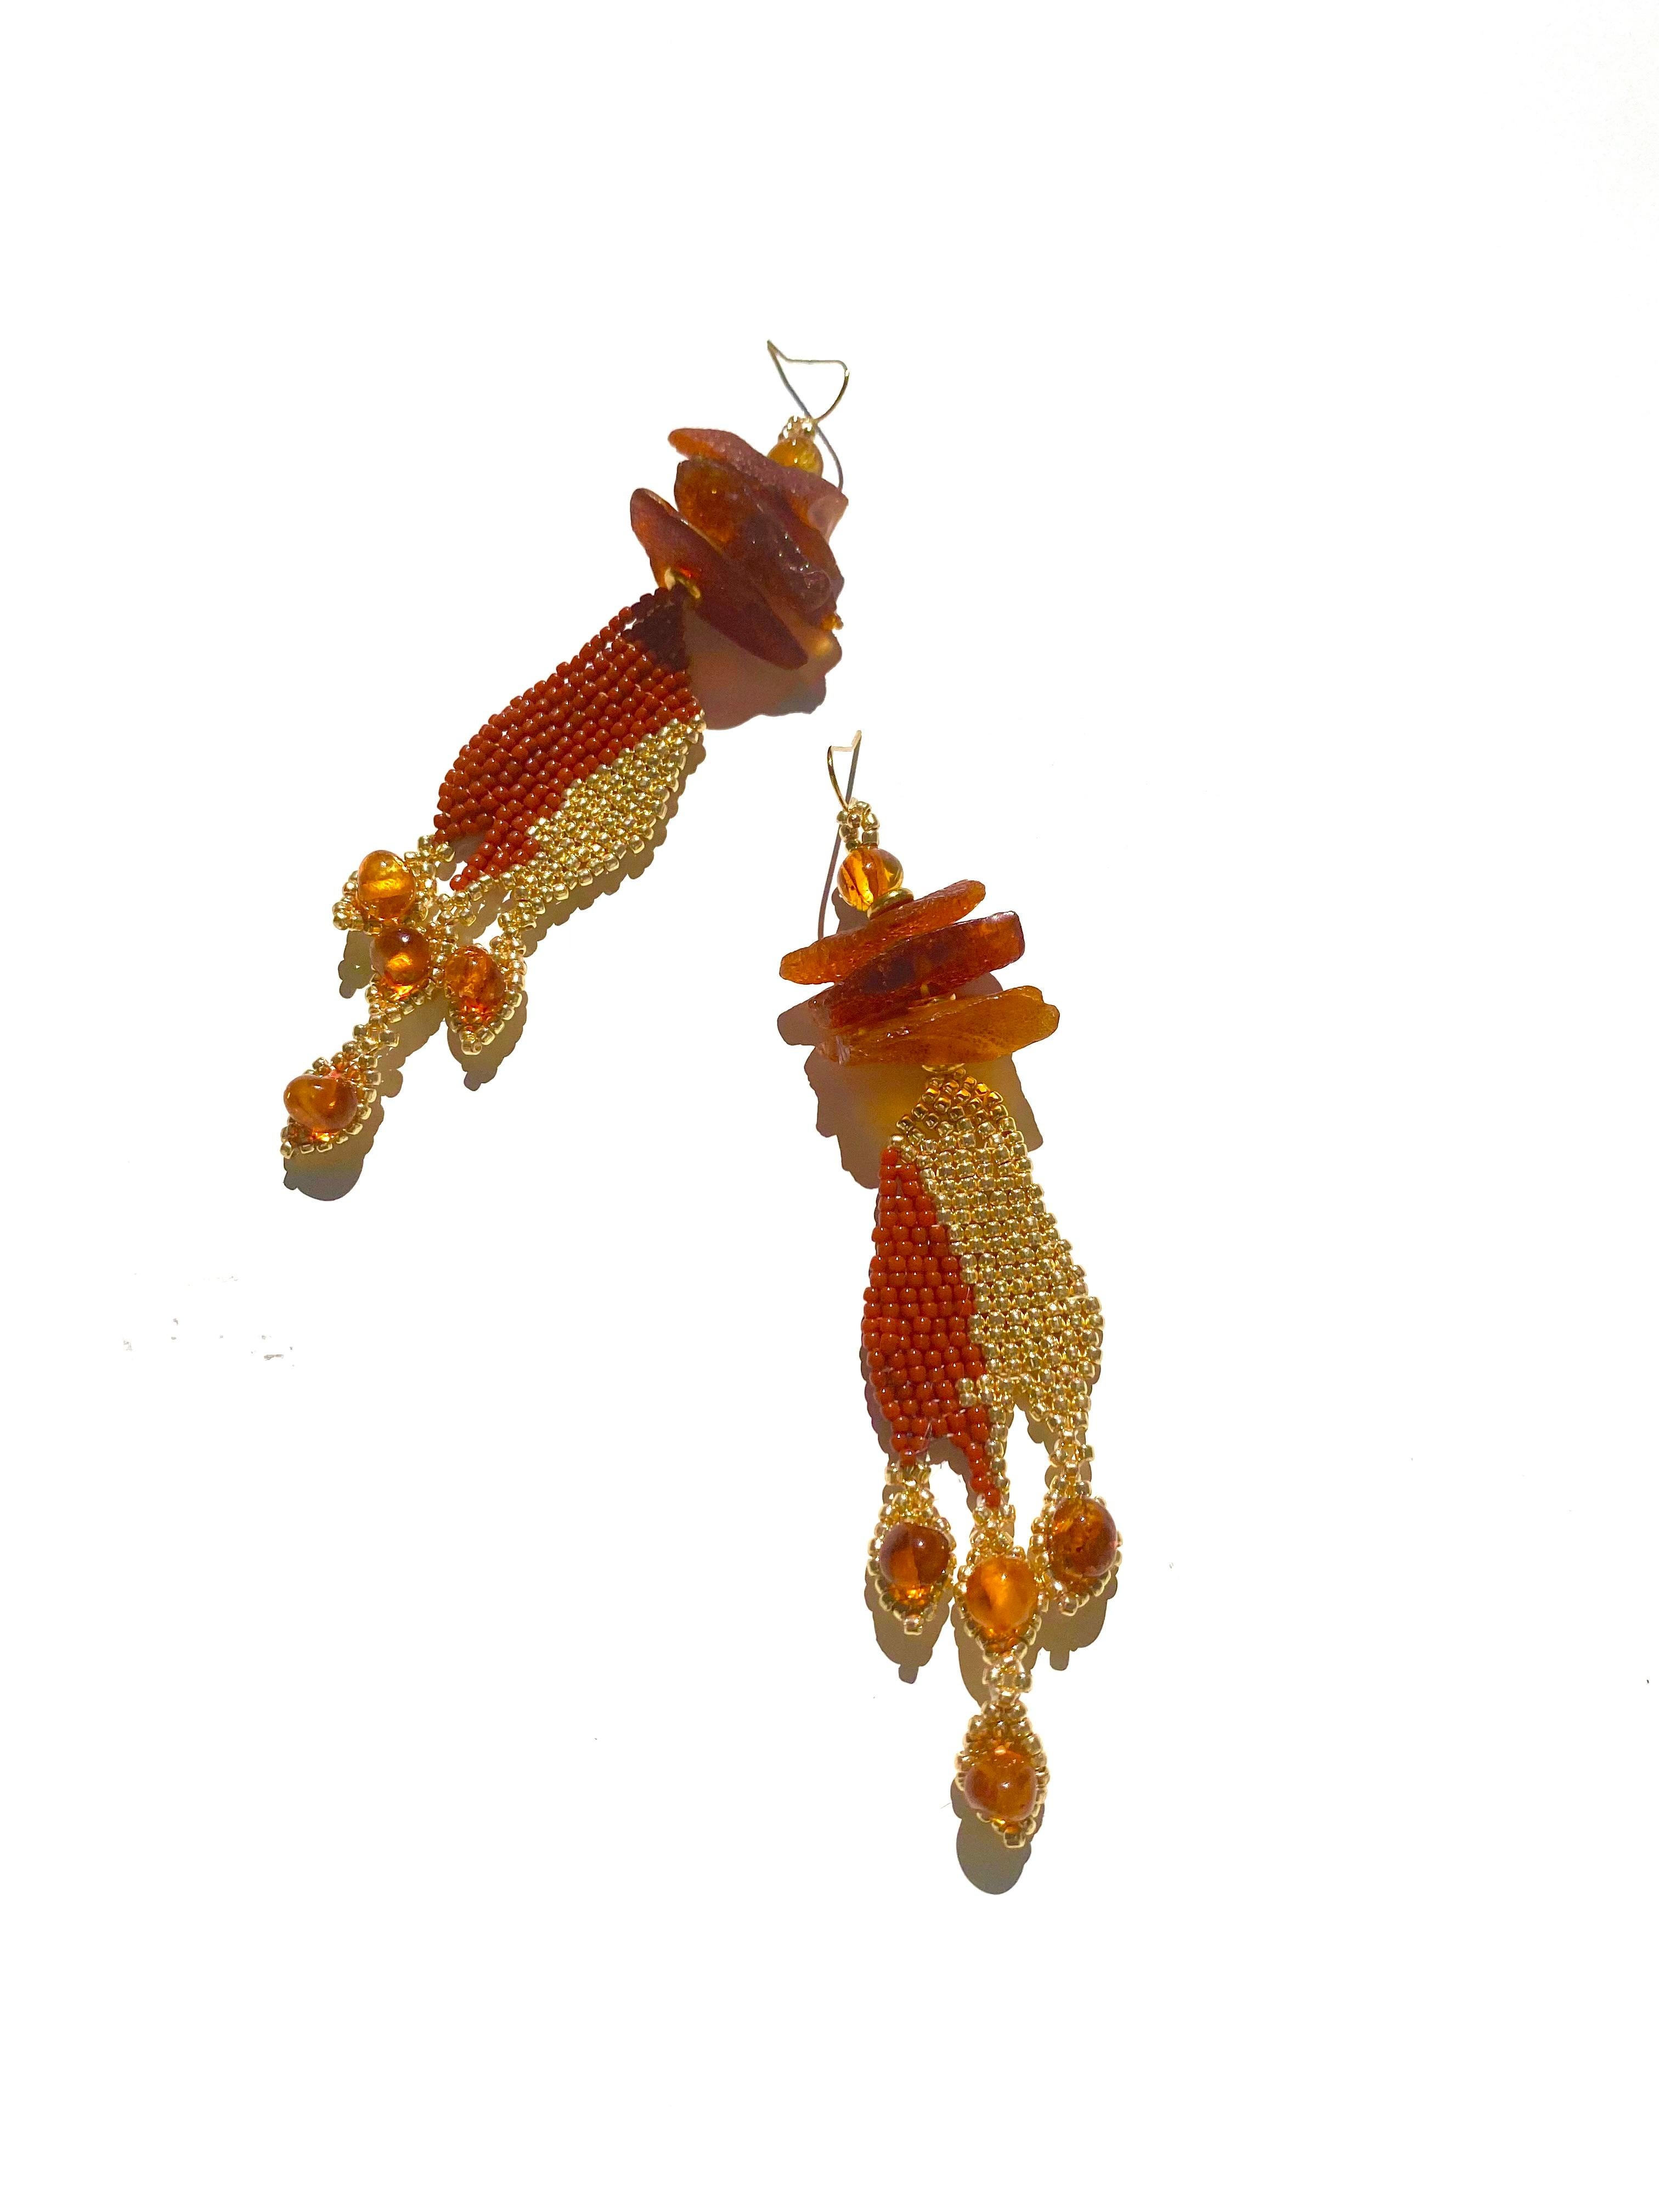 Handwoven in a shape of flames, permanent 14k gold-plated and marron Japanese seed beads, with large Baltic Amber chips and beads.

Pele is inspired by the goddess of volcanic fire, who is also referred to as She Who Shapes the Sacred Land. She's a